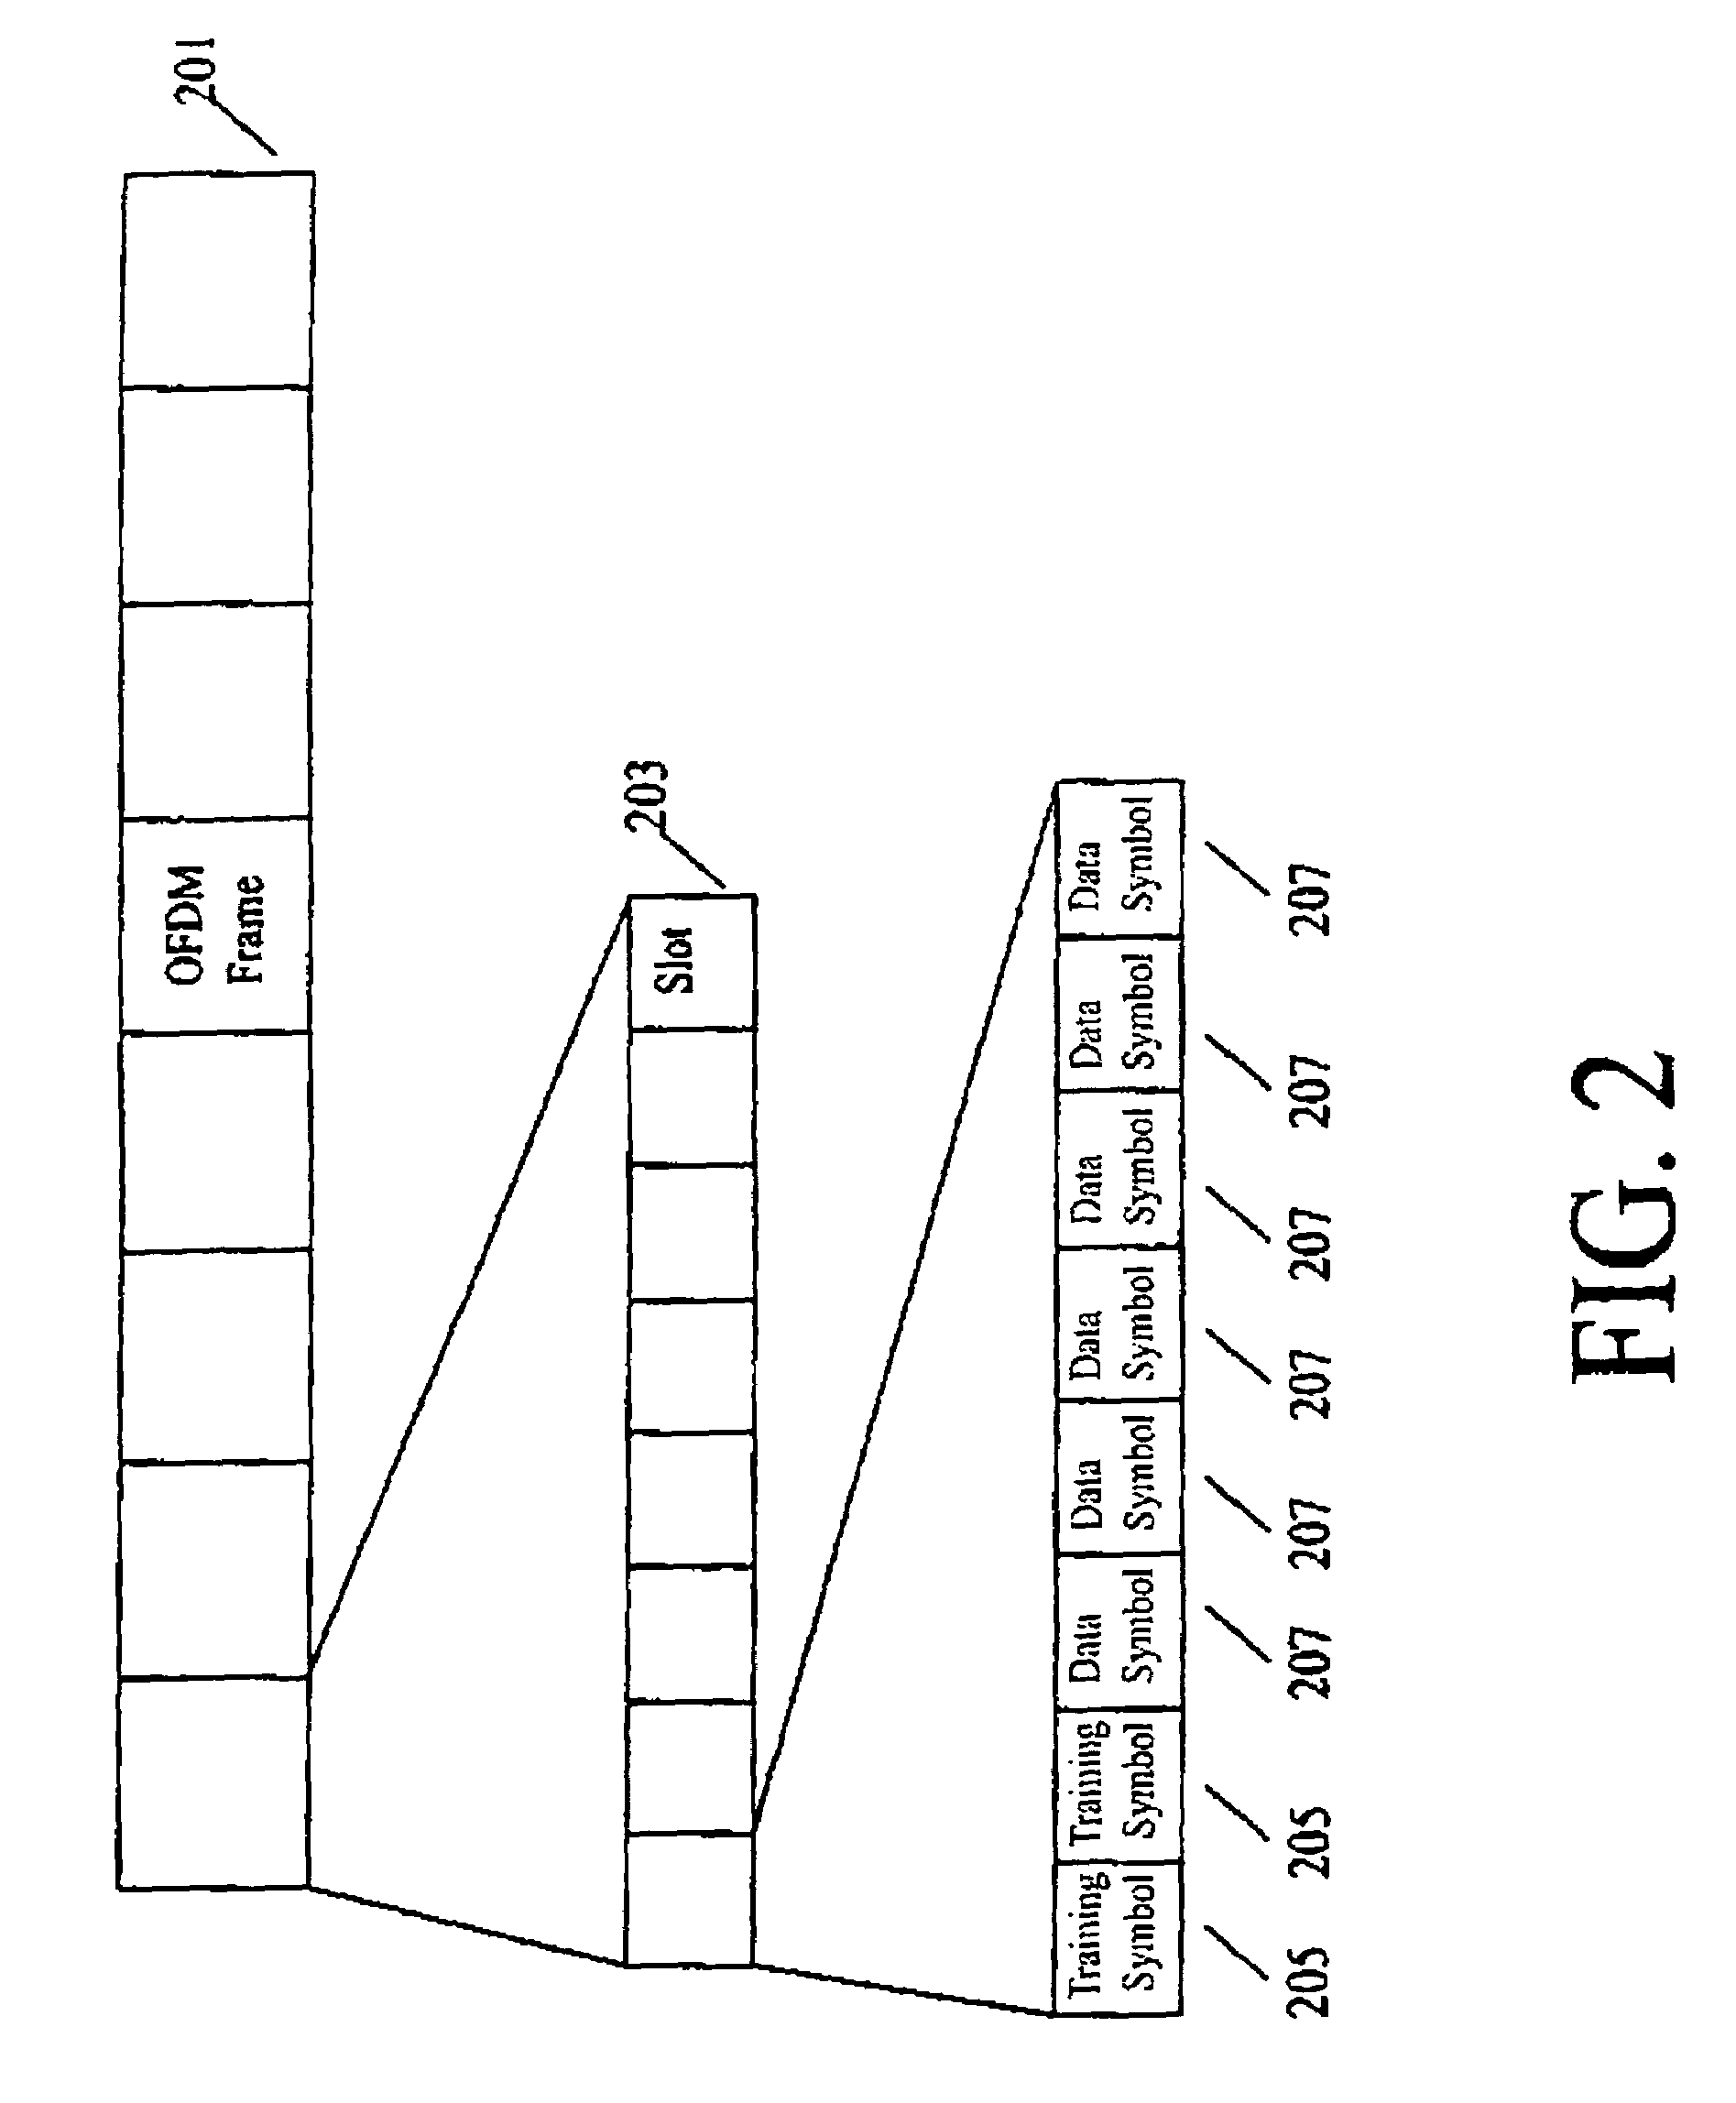 Preamble design for multiple input-multiple output (MIMO), orthogonal frequency division multiplexing (OFDM) system